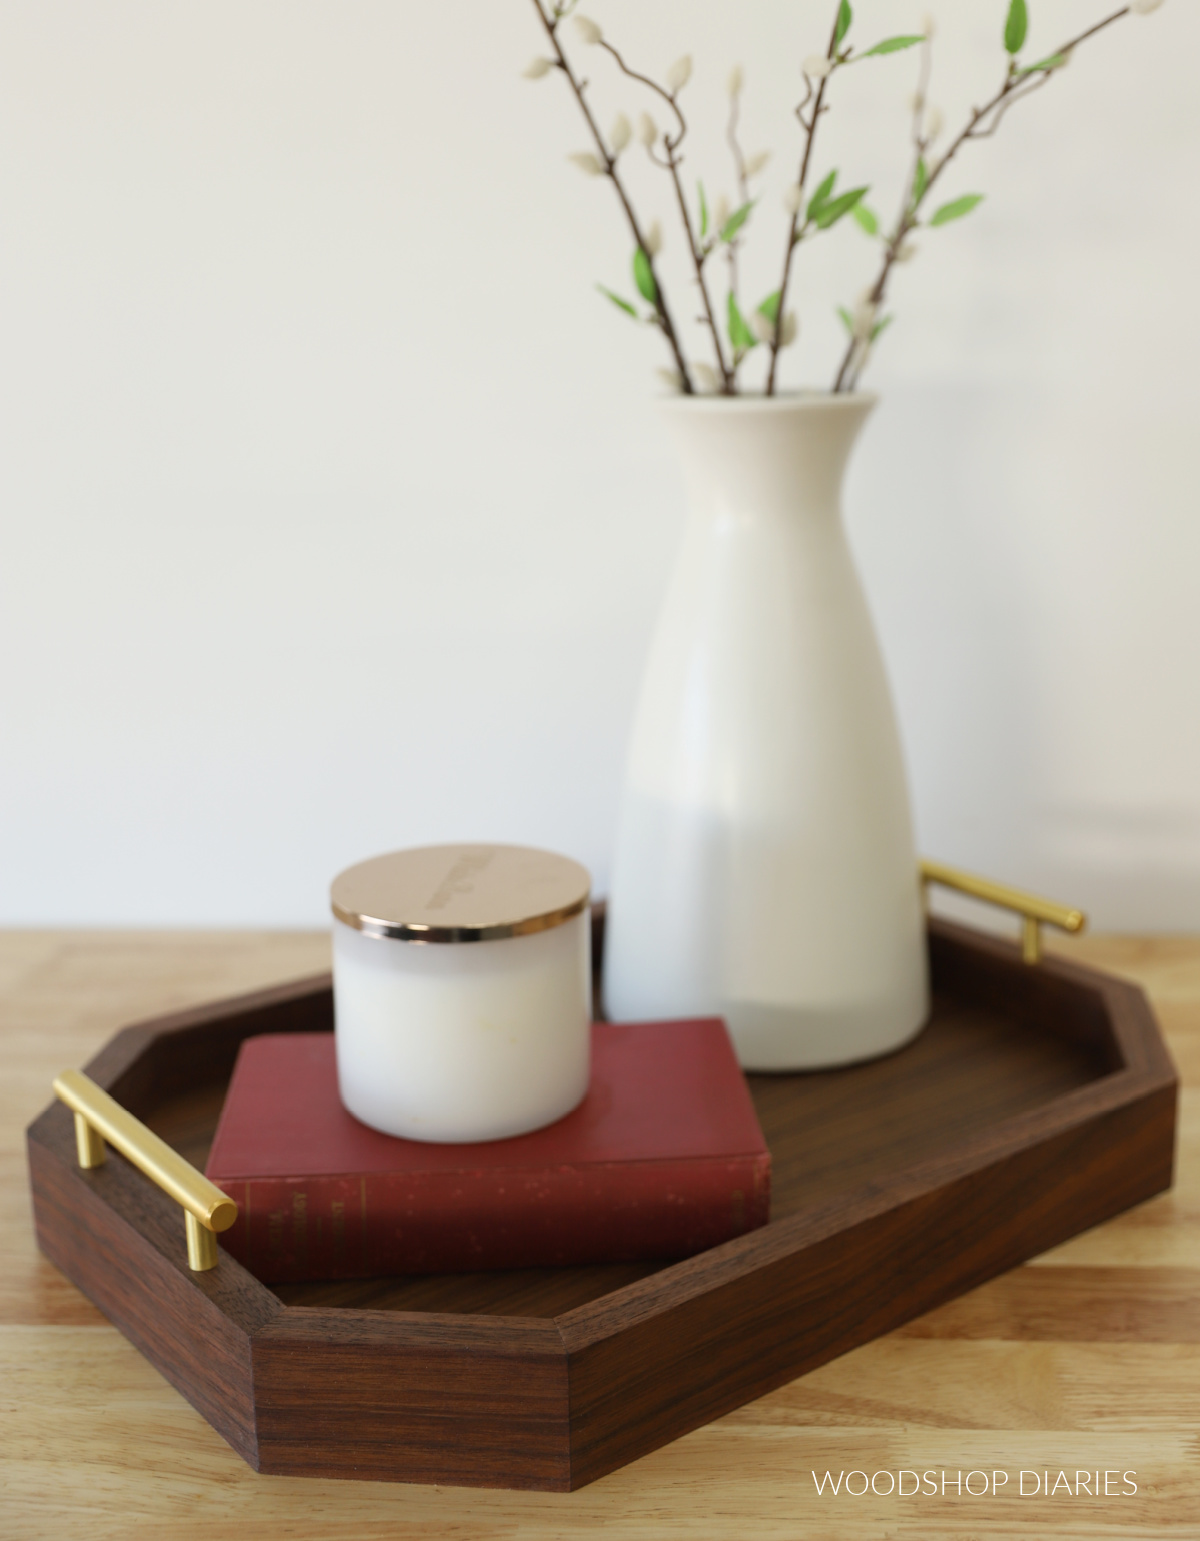 Completed walnut modern DIY serving tray with book, vase, and candle on butcherblock countertop